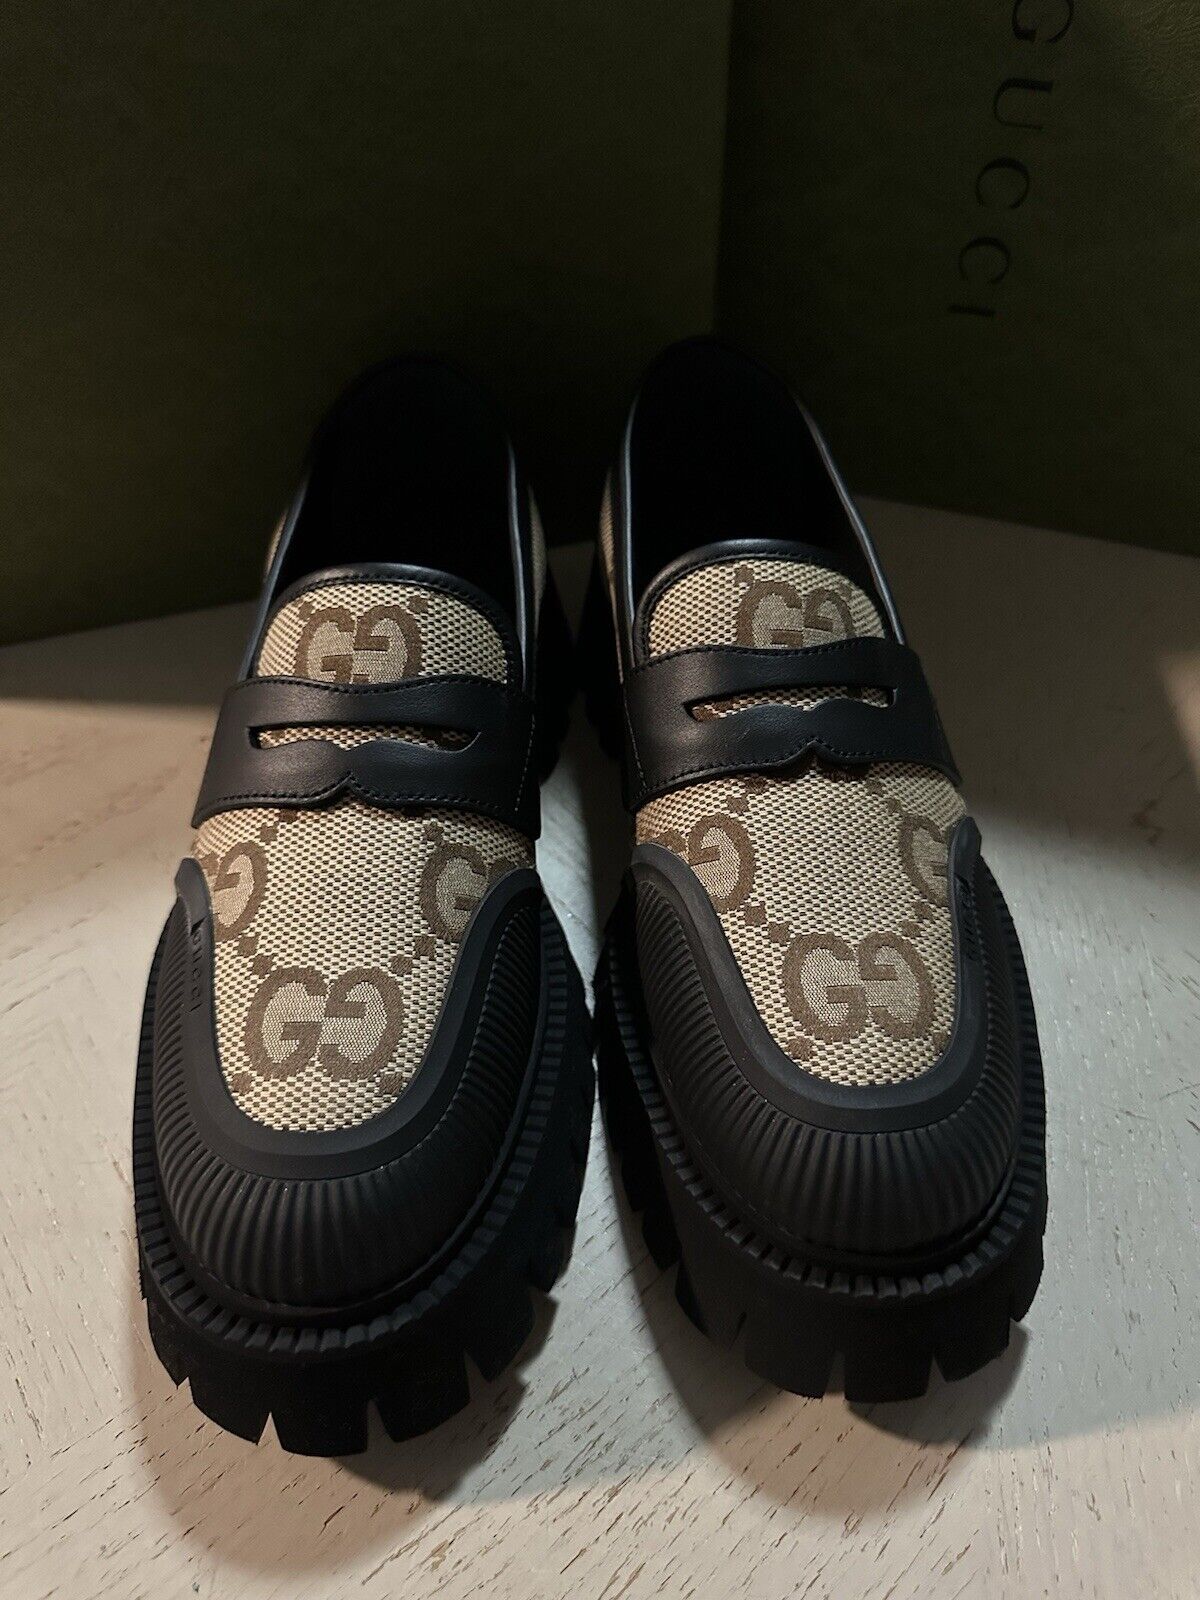 Gucci Mens GG Logo light weight Loafers Shoes Black/Camel 10 US/9 UK 739776 New